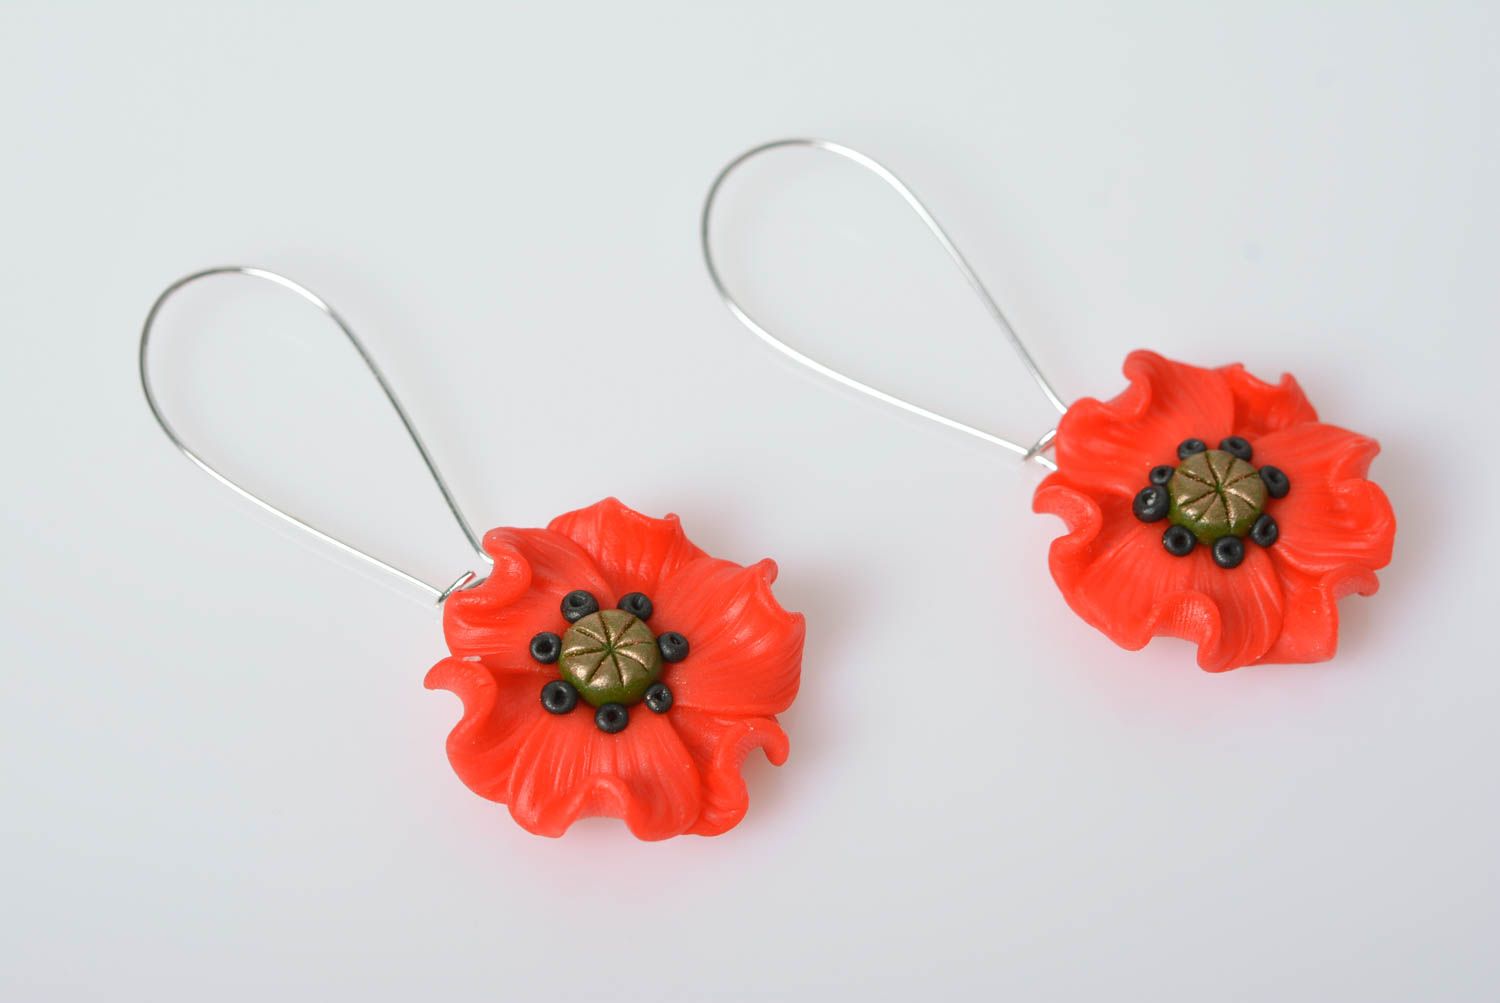 Handmade polymer clay earrings with red poppies designer stylish summer jewelry photo 4